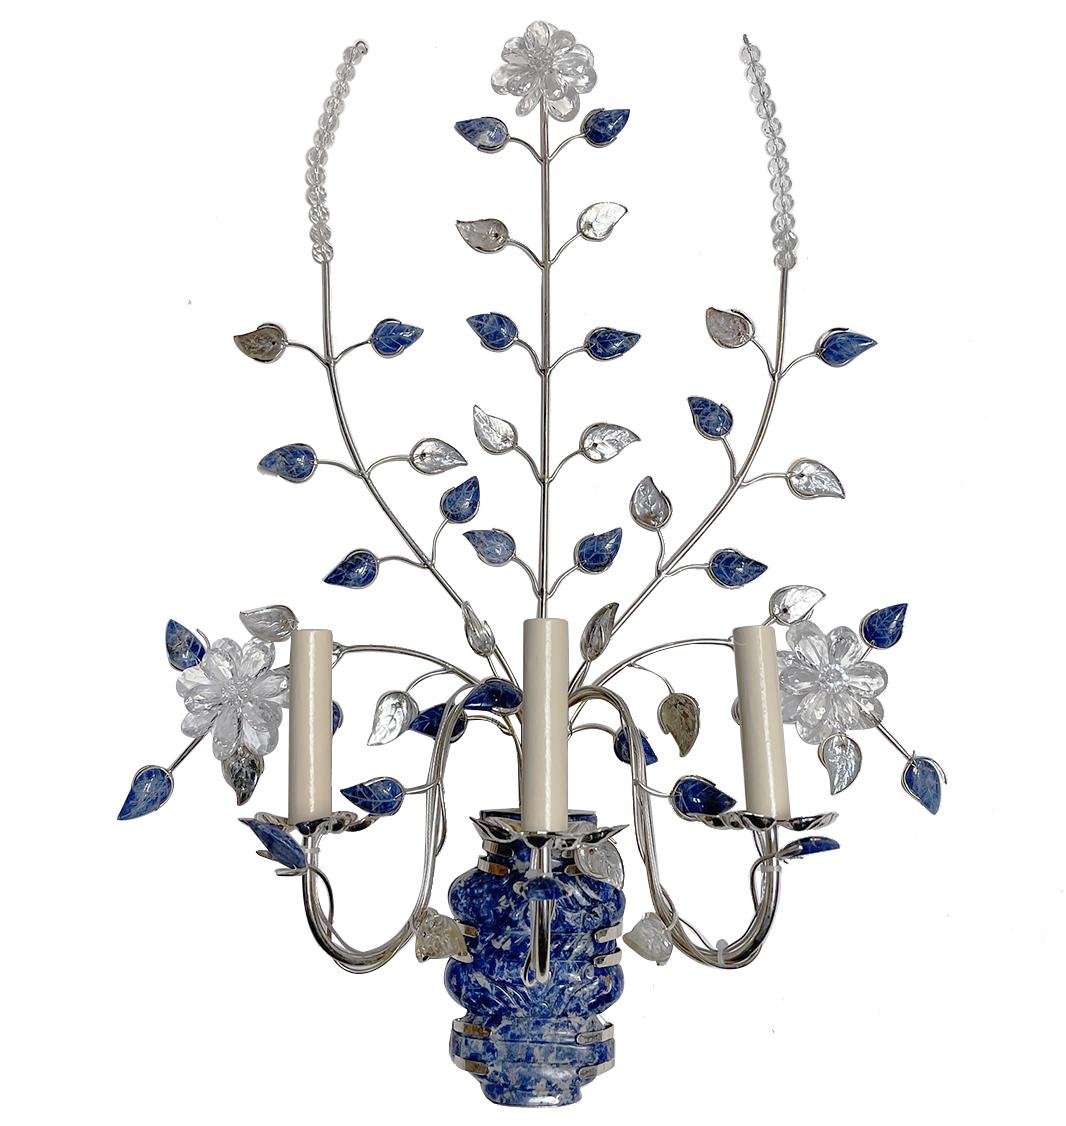 A pair of French circa late 1960's three-arm silver-plated sconces with lapis lazuli stone body molded glass leaves and crystal flowers.

Measurements:
Height: 28